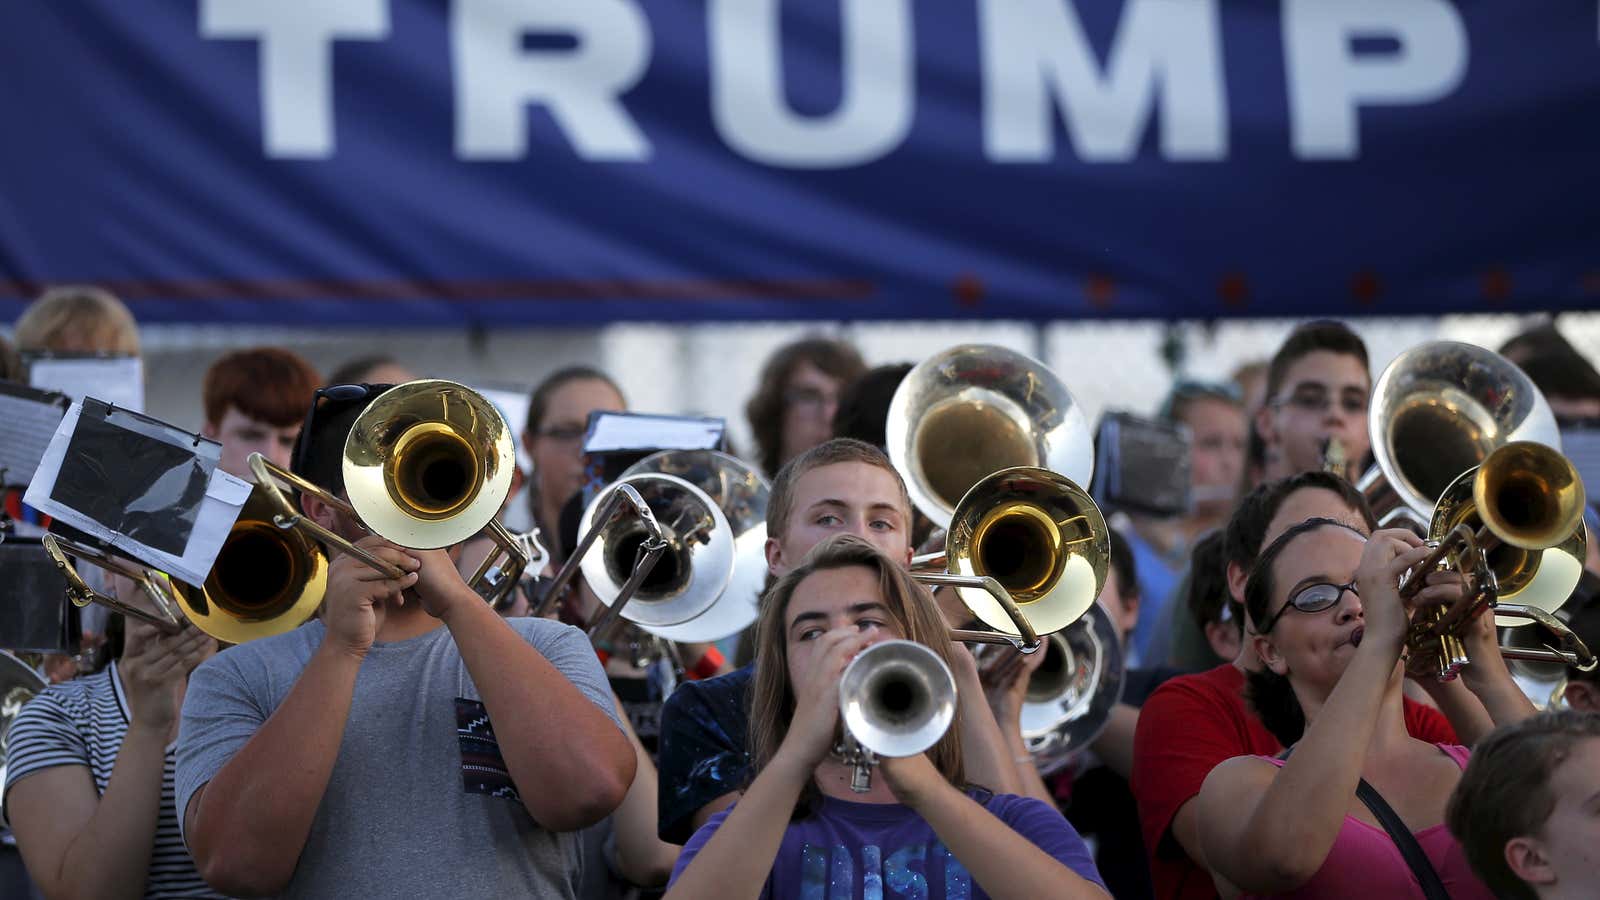 Marching bands may be happy with Trump, but professional artists aren’t.